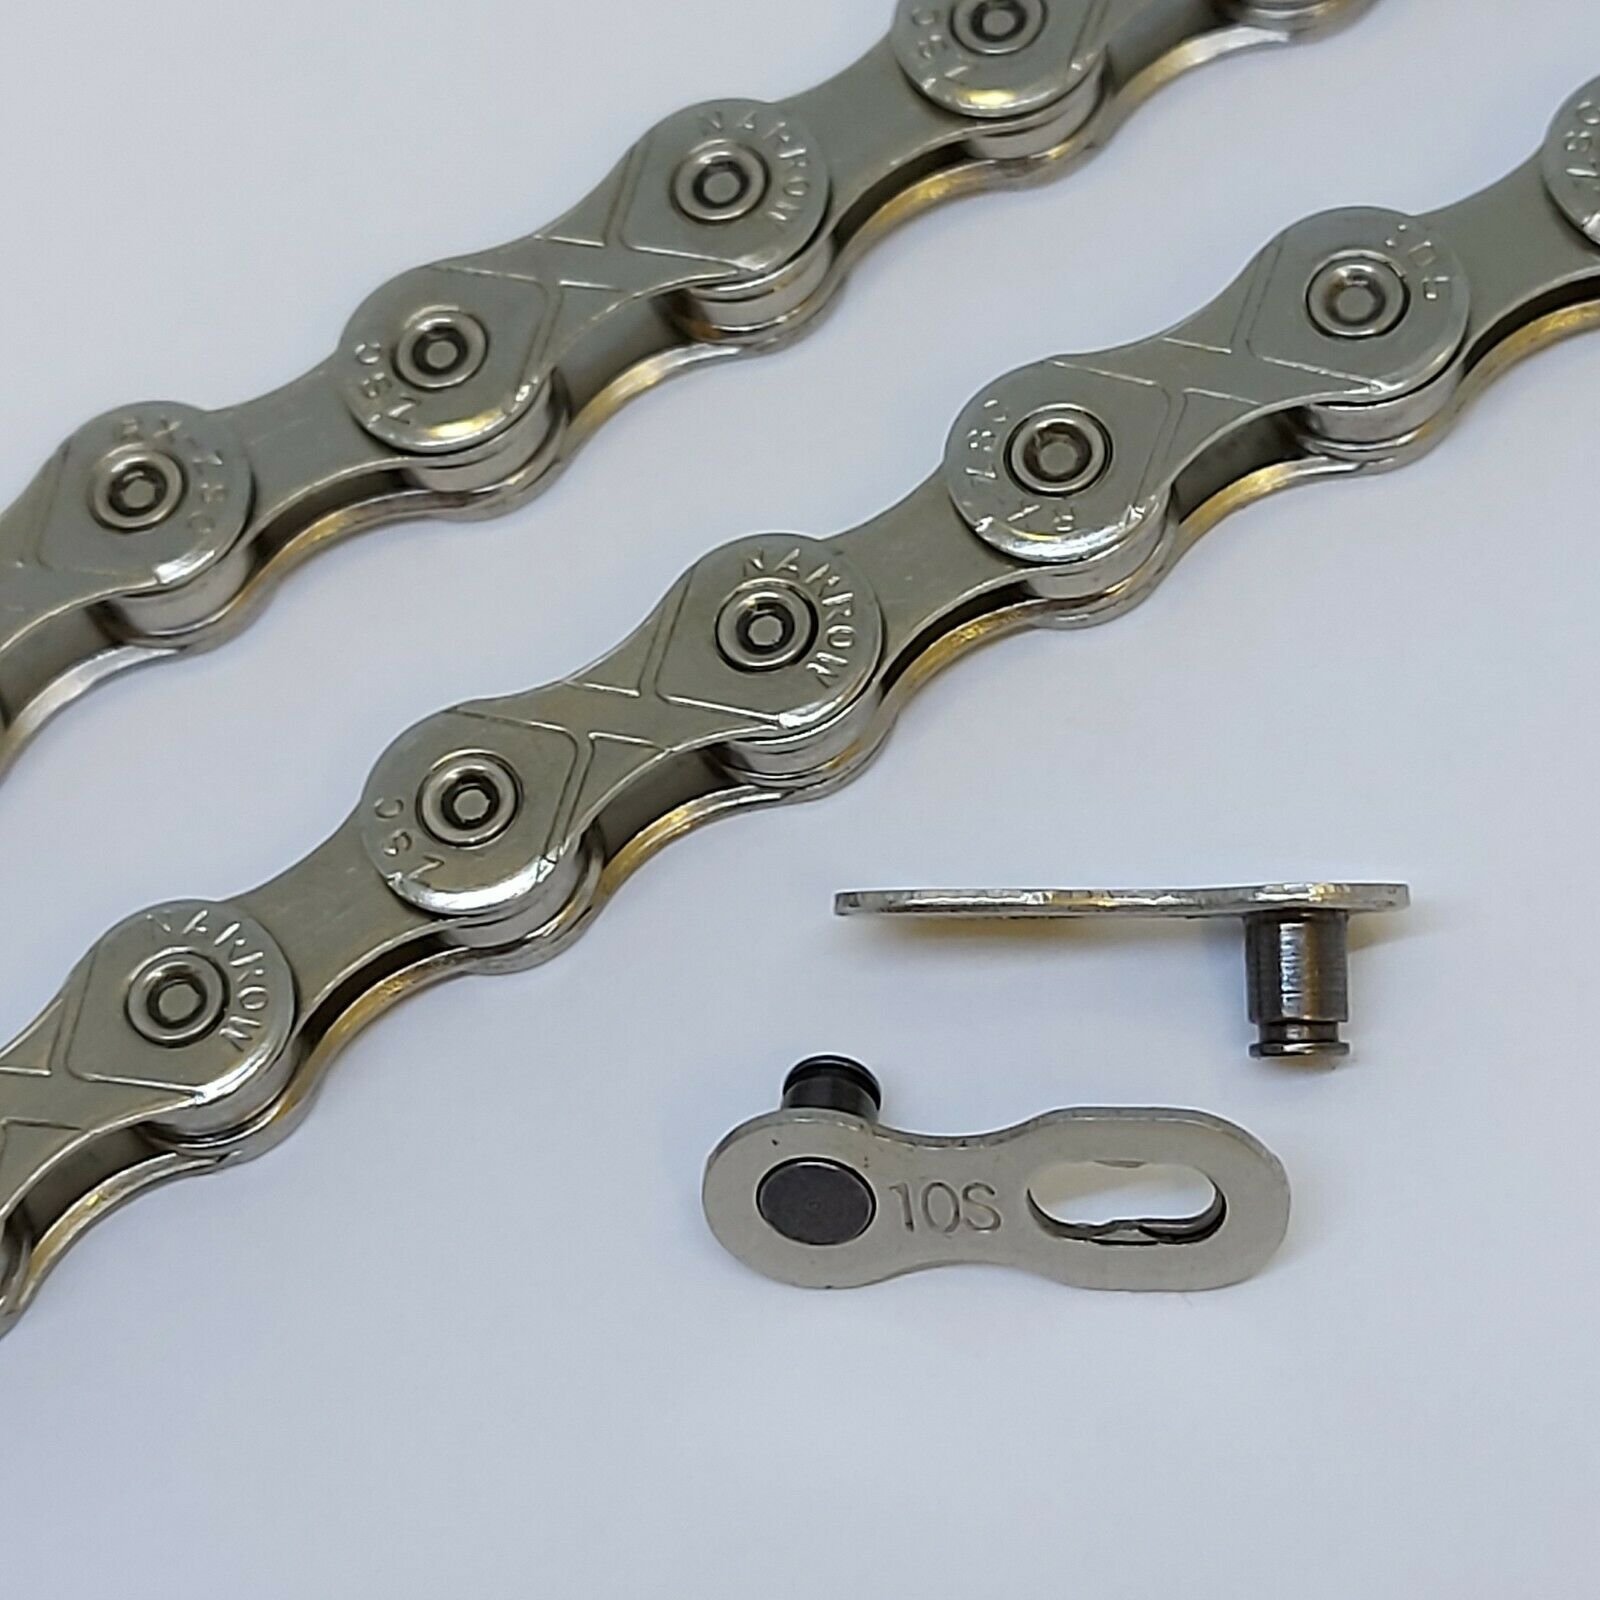 Kmc 10 Speed Chain Outlet Offers, Save 60% | jlcatj.gob.mx